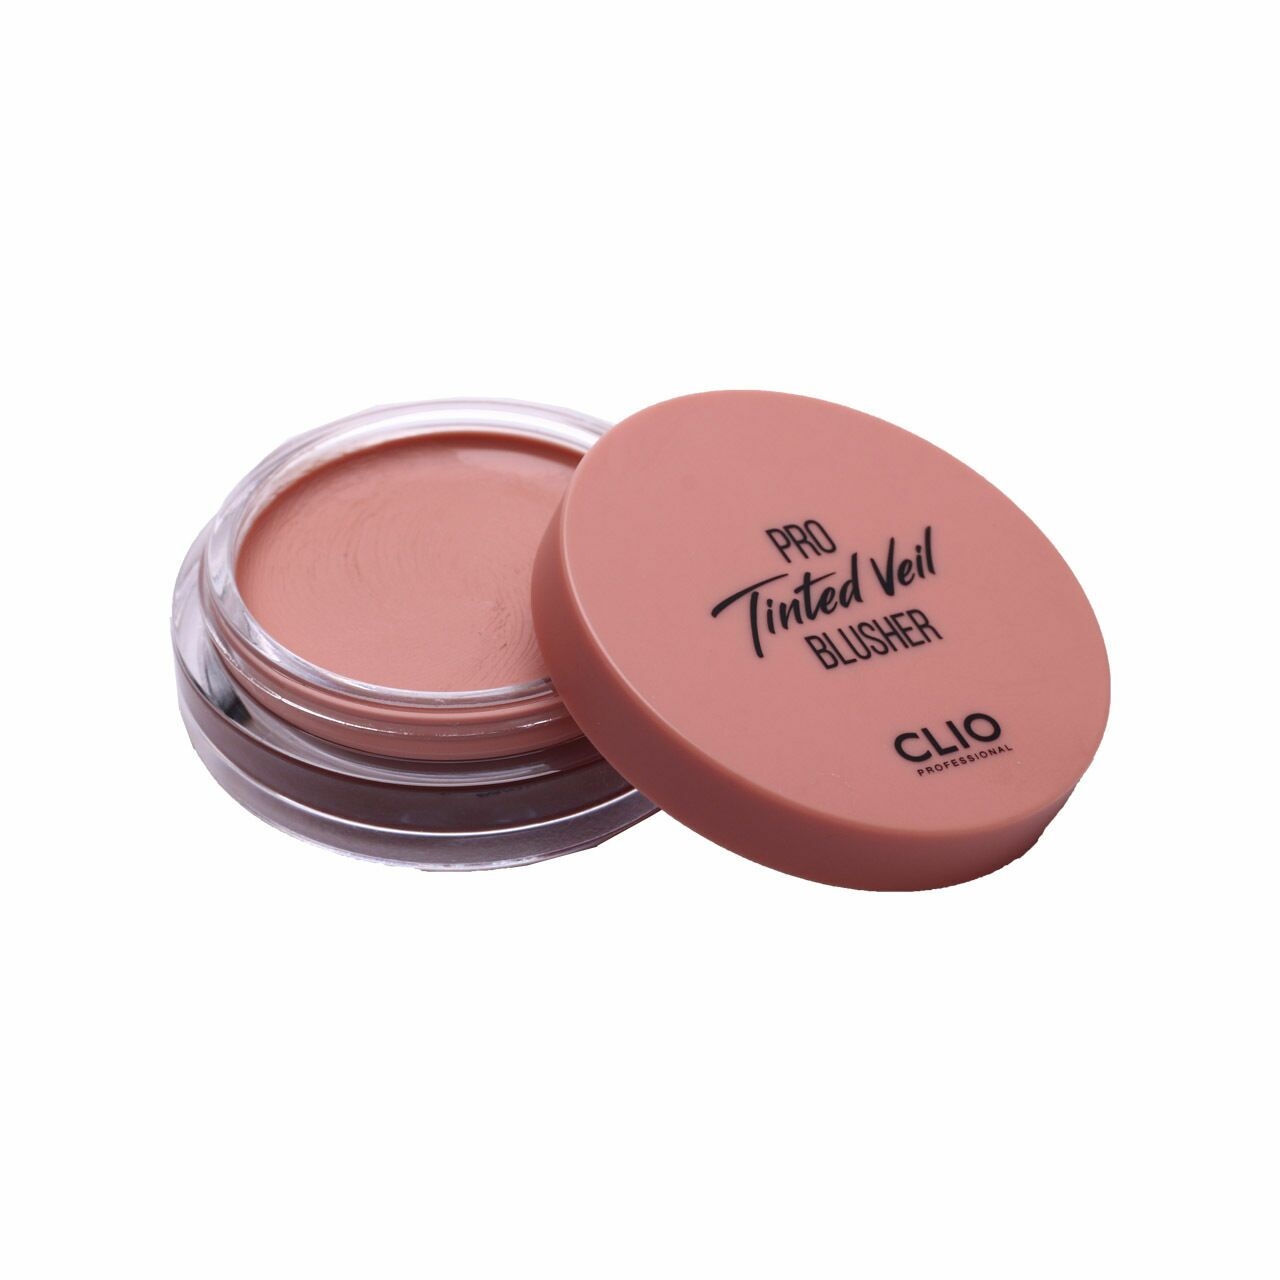 Clio Pro Tinted Veil Blusher Faces